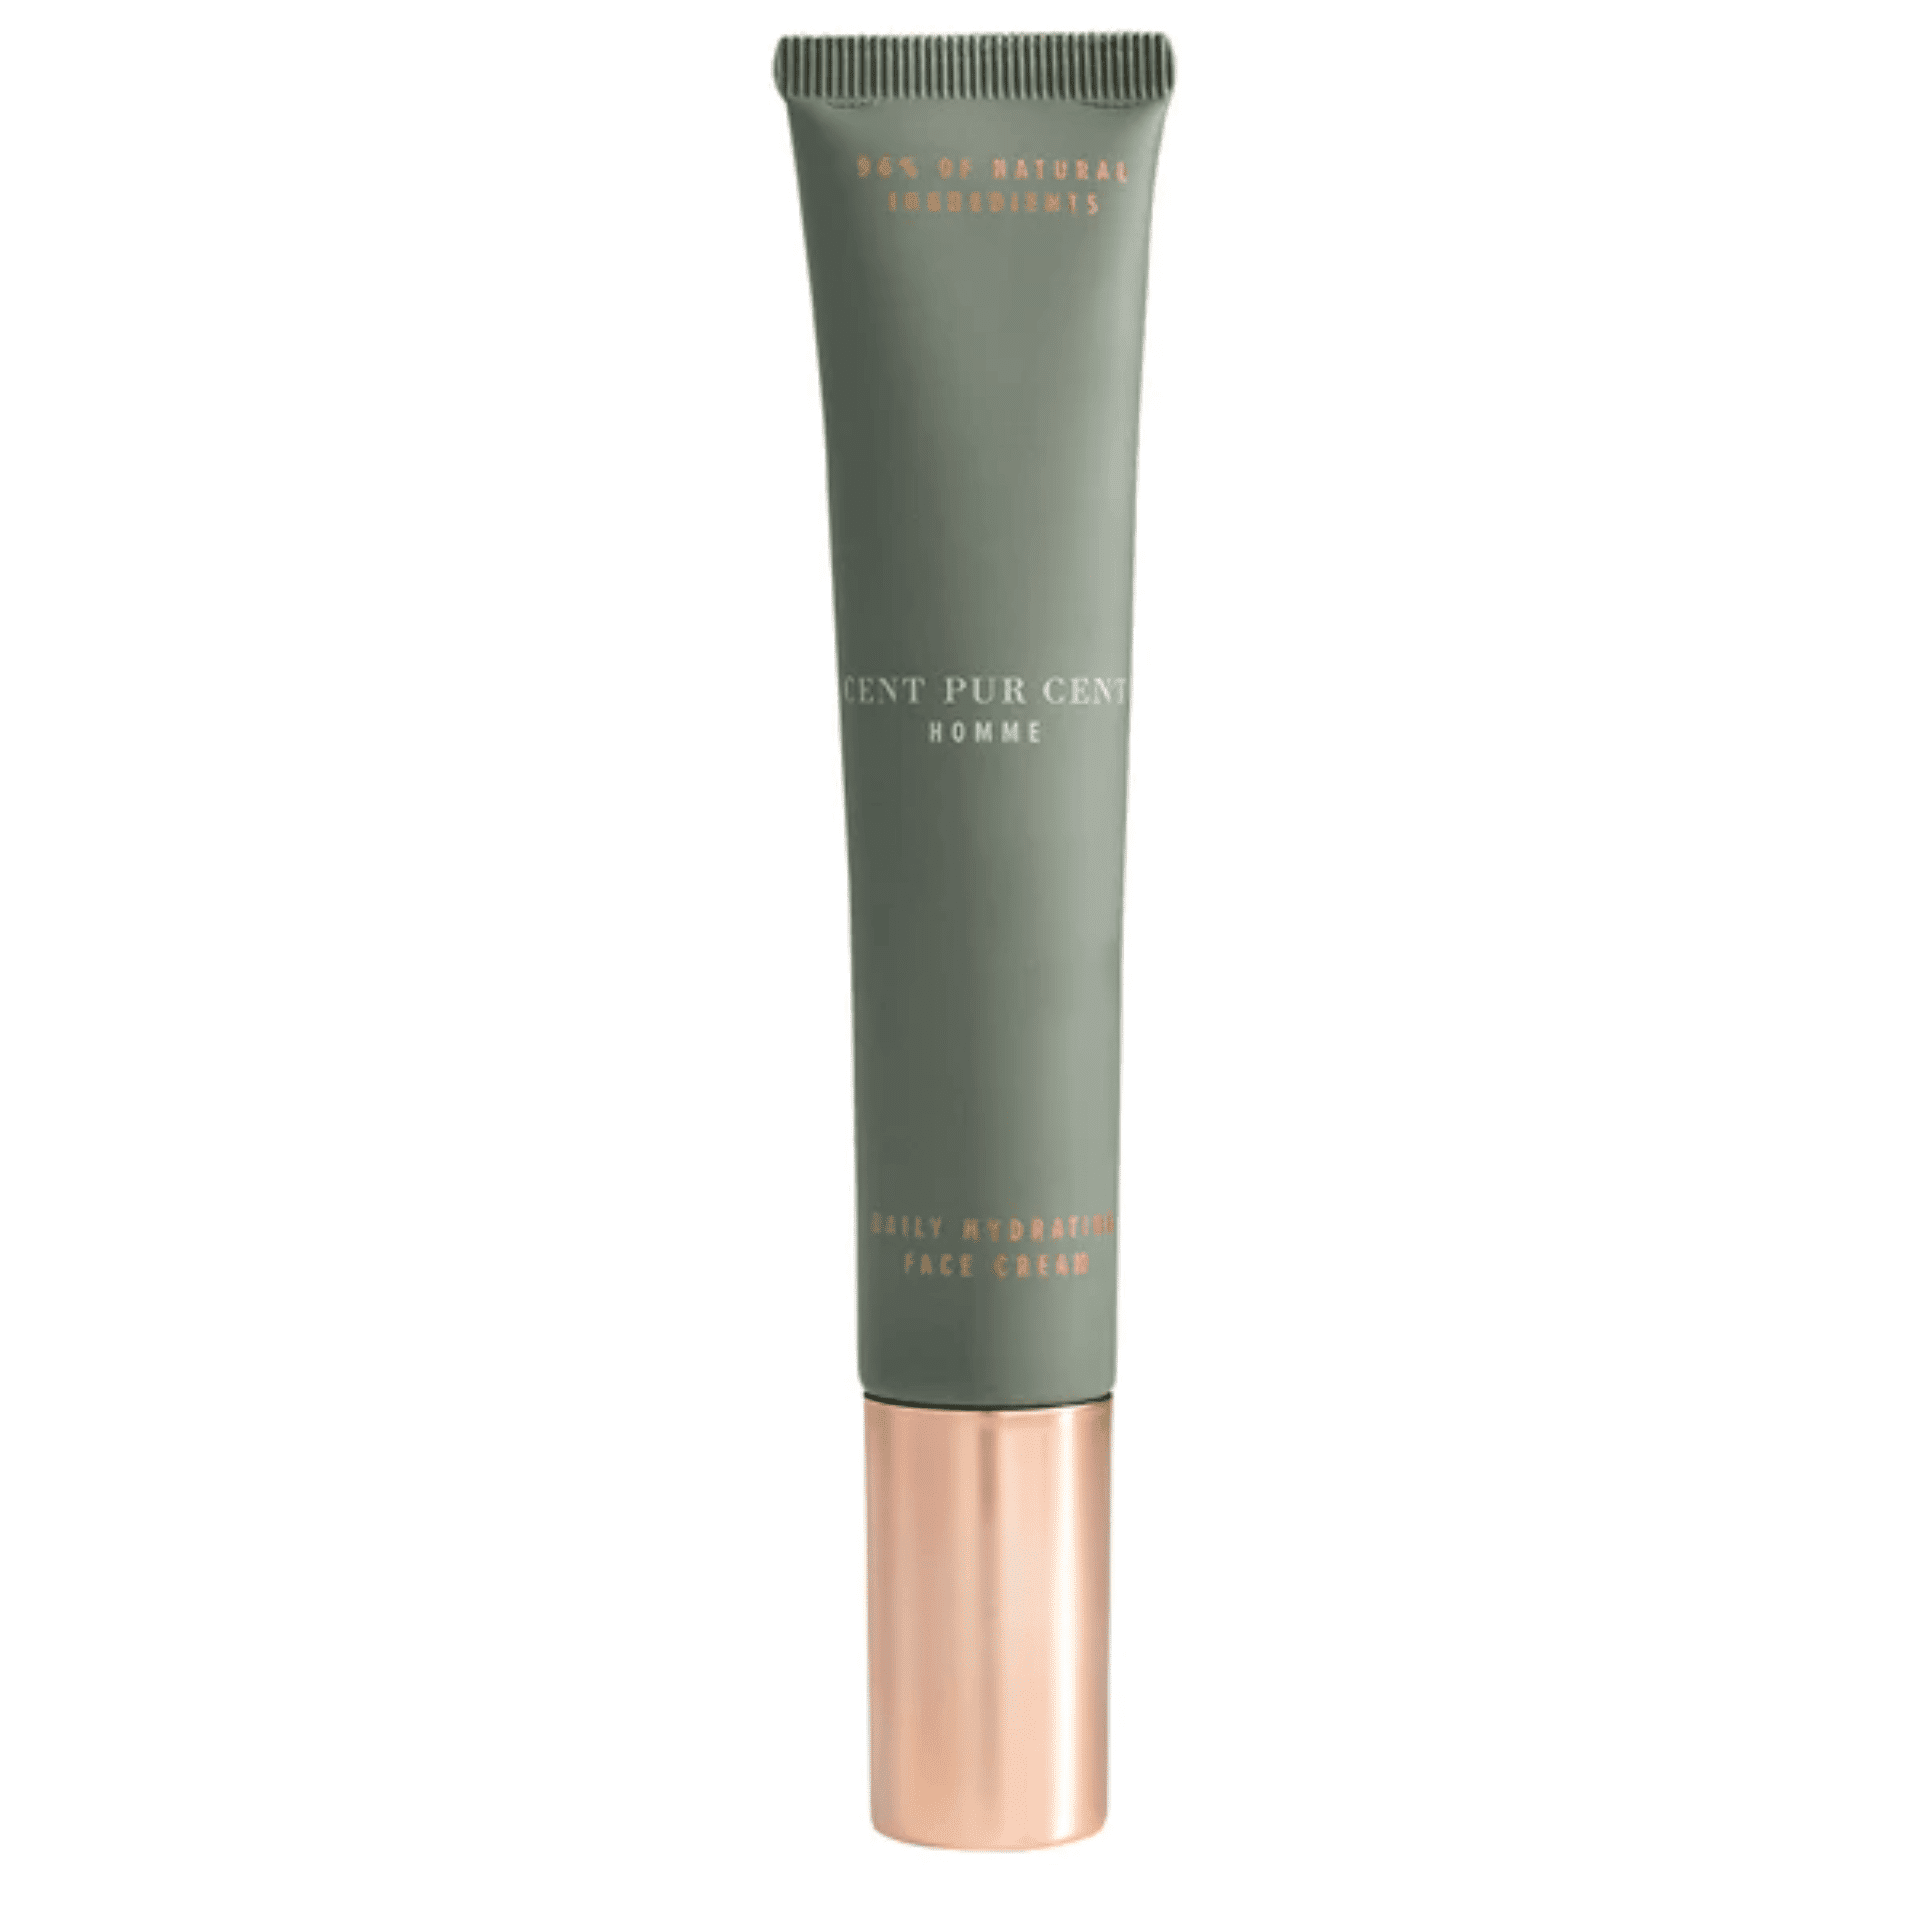 Cent Pur Cent Homme Daily Hydrating Face Cream